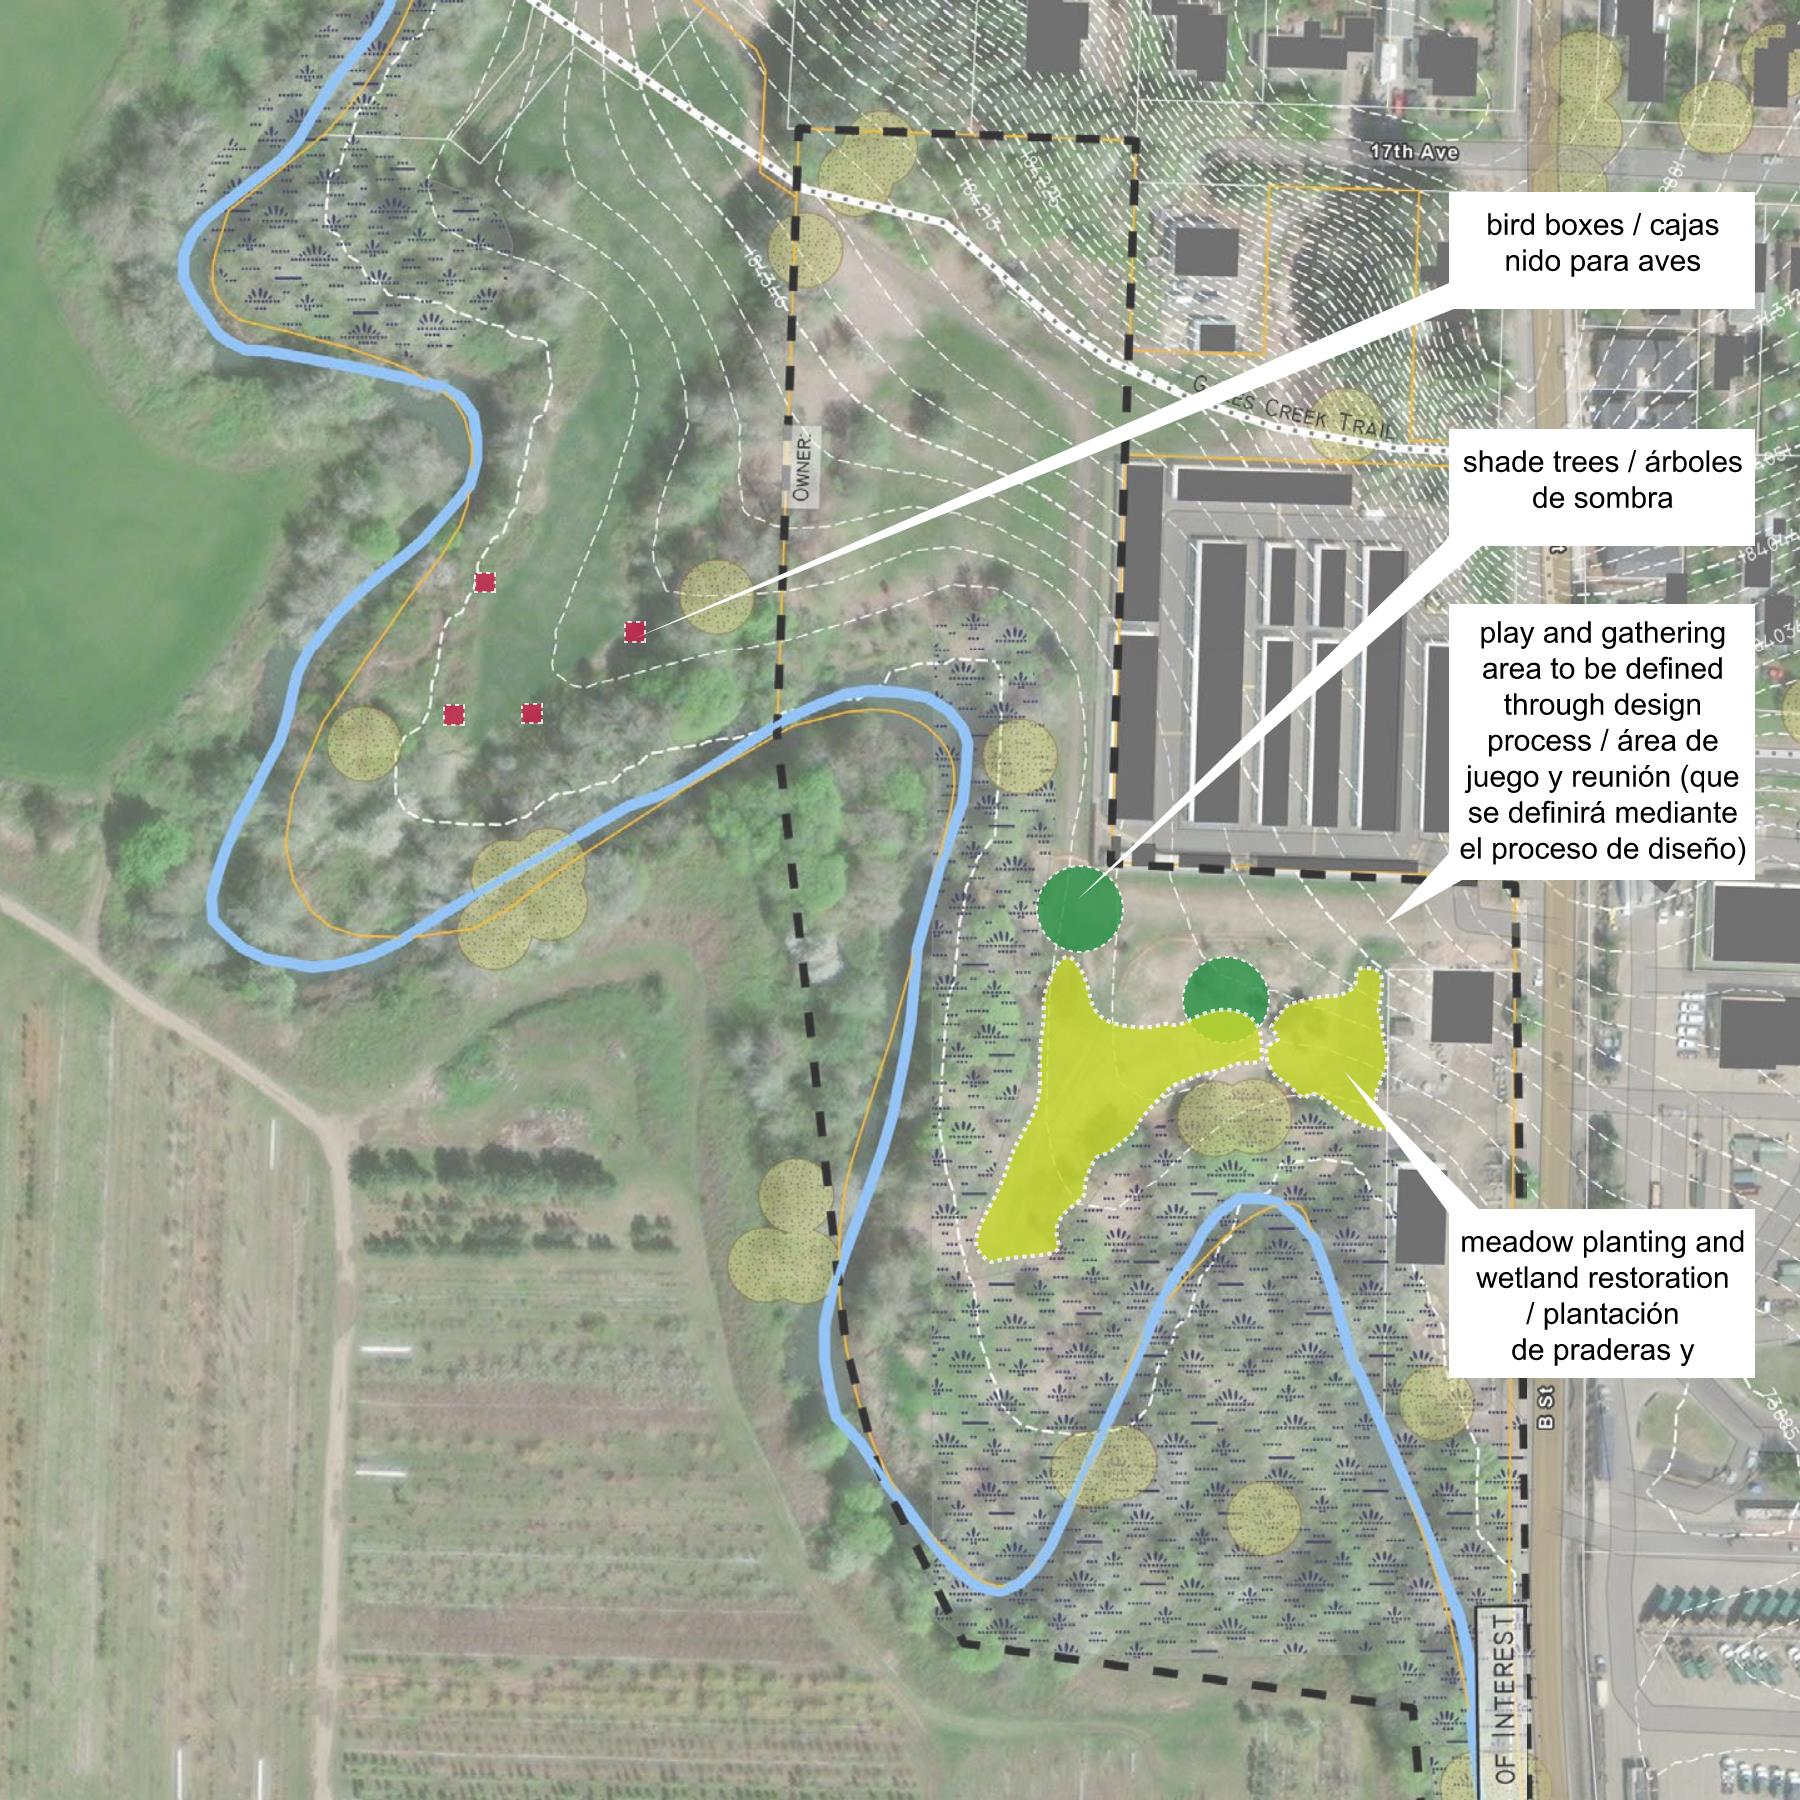 Image alt text: A new play and gathering area is being developed by Forest Grove in the nook of nature south of B Street Self Storage, West of B St, and cradled by Gales Creek. The play and gathering area will be define through a design process with the city. The Community Choice Grant proposes two new shade trees and meadow planting/ wetland restoration. The restoration will occur along the south end between the flood plain and new gathering and play areas. The Community Choice Grant also proposes new bird boxes nestled into the natural area along Gale Creek will provide homes for resident birds.